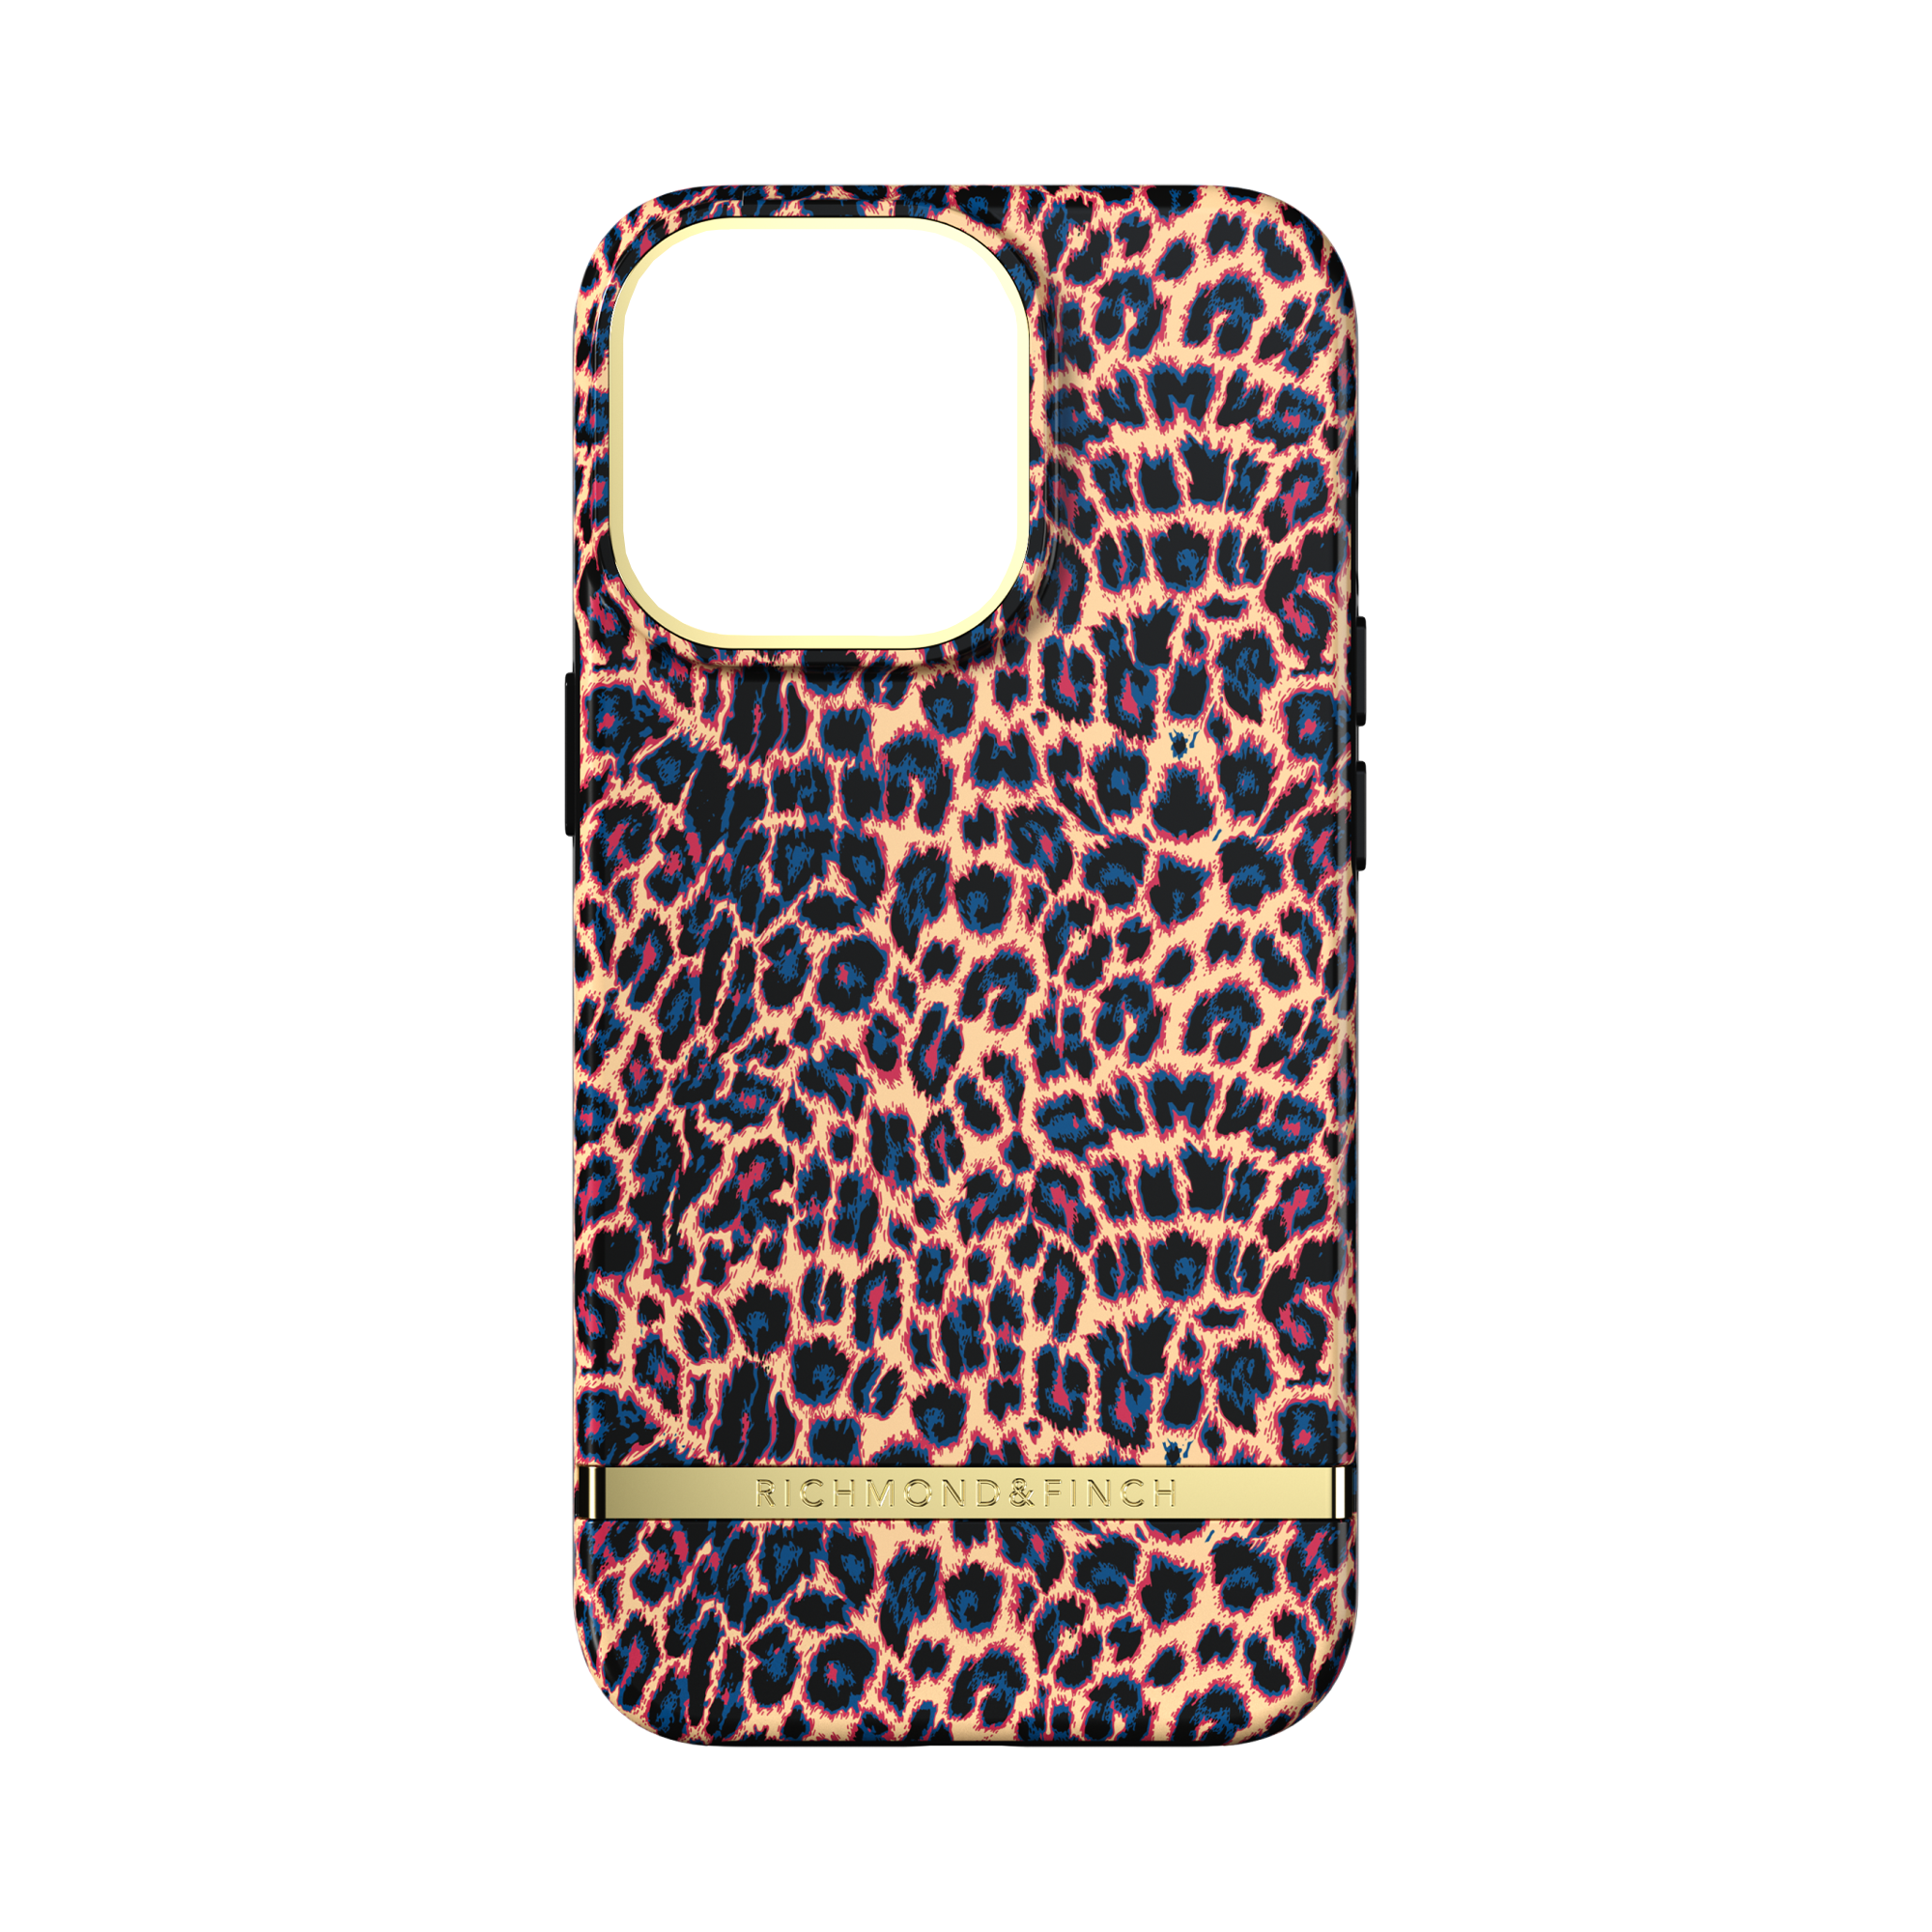 mehrfarbig FINCH 13 RICHMOND Apple, & iPhone Backcover, Apricot Pro, Leopard, iPhone Tasche